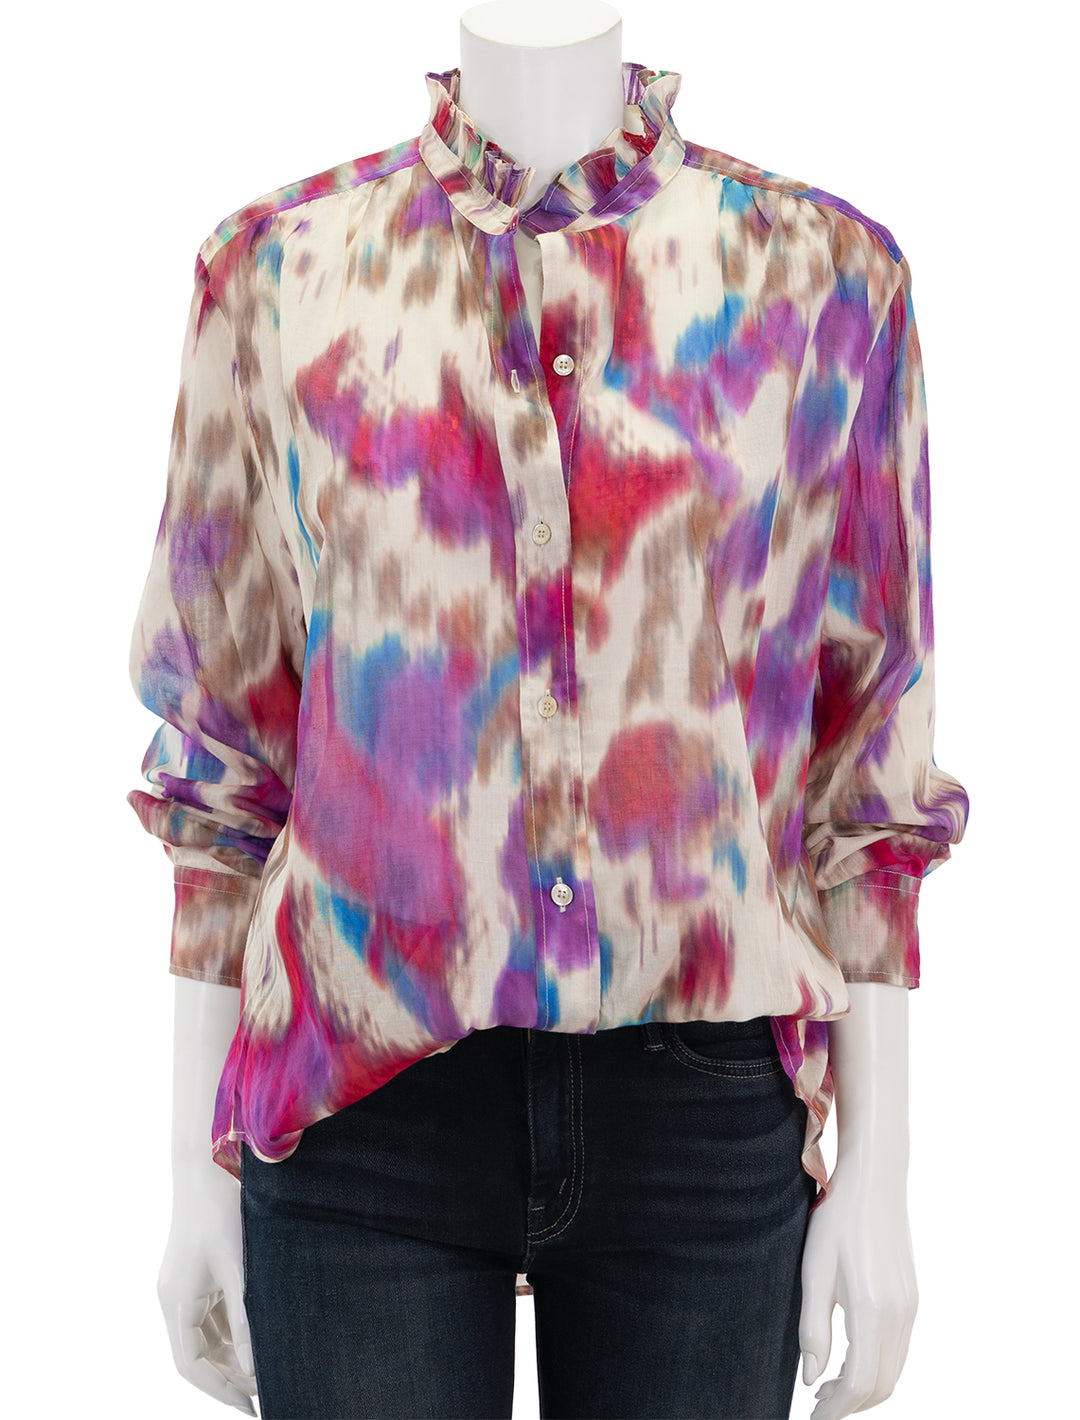 Front view of Isabel Marant Etoile's gamble top in beige and raspberry print.